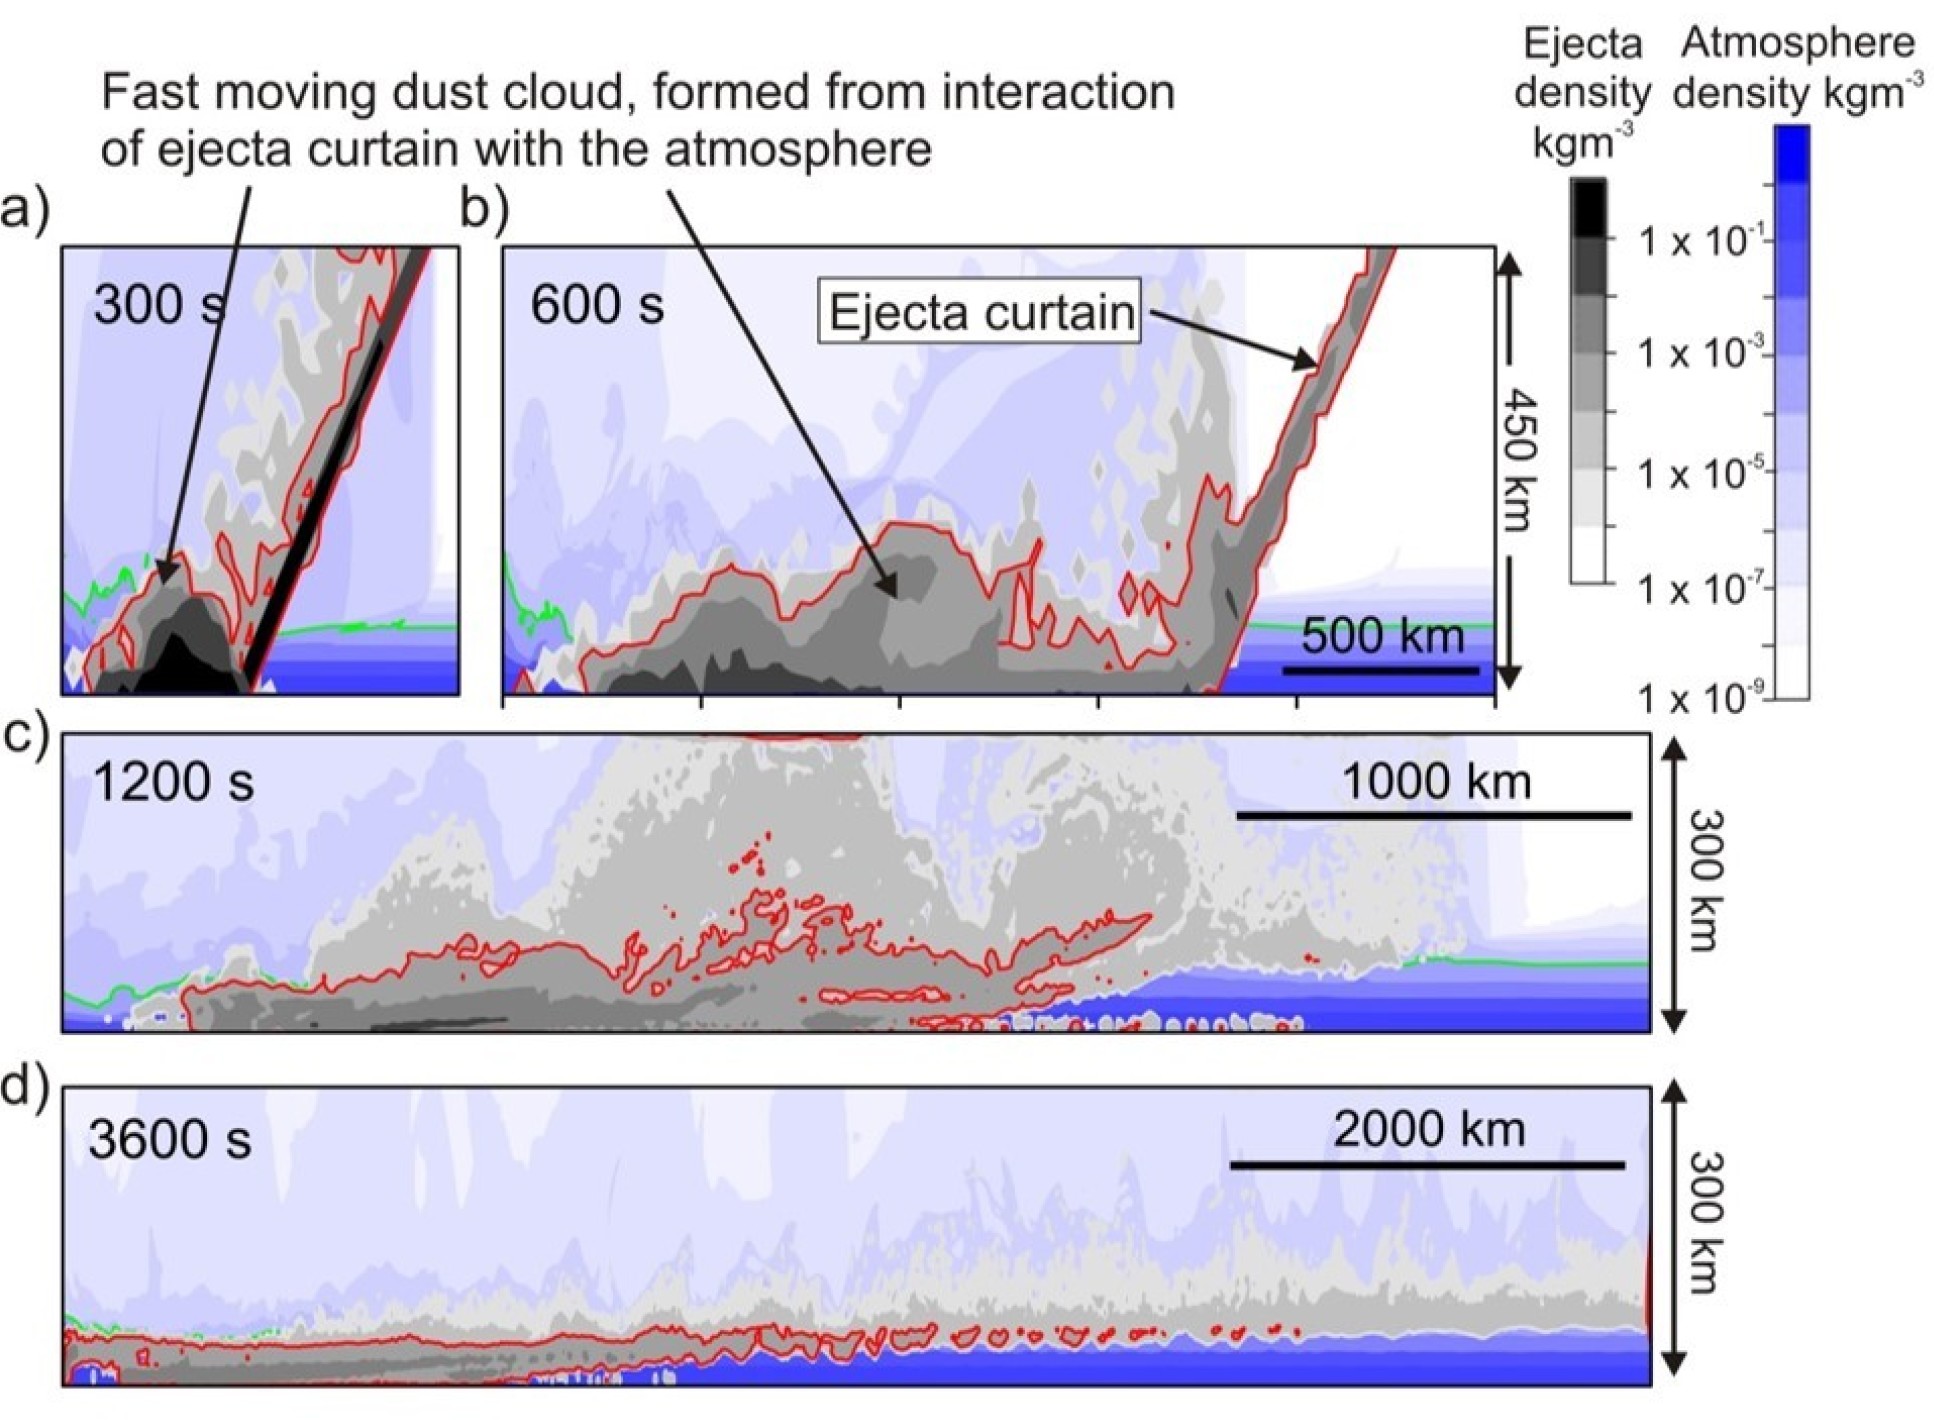 Figure: Global ejecta deposited from a fast-moving dust cloud